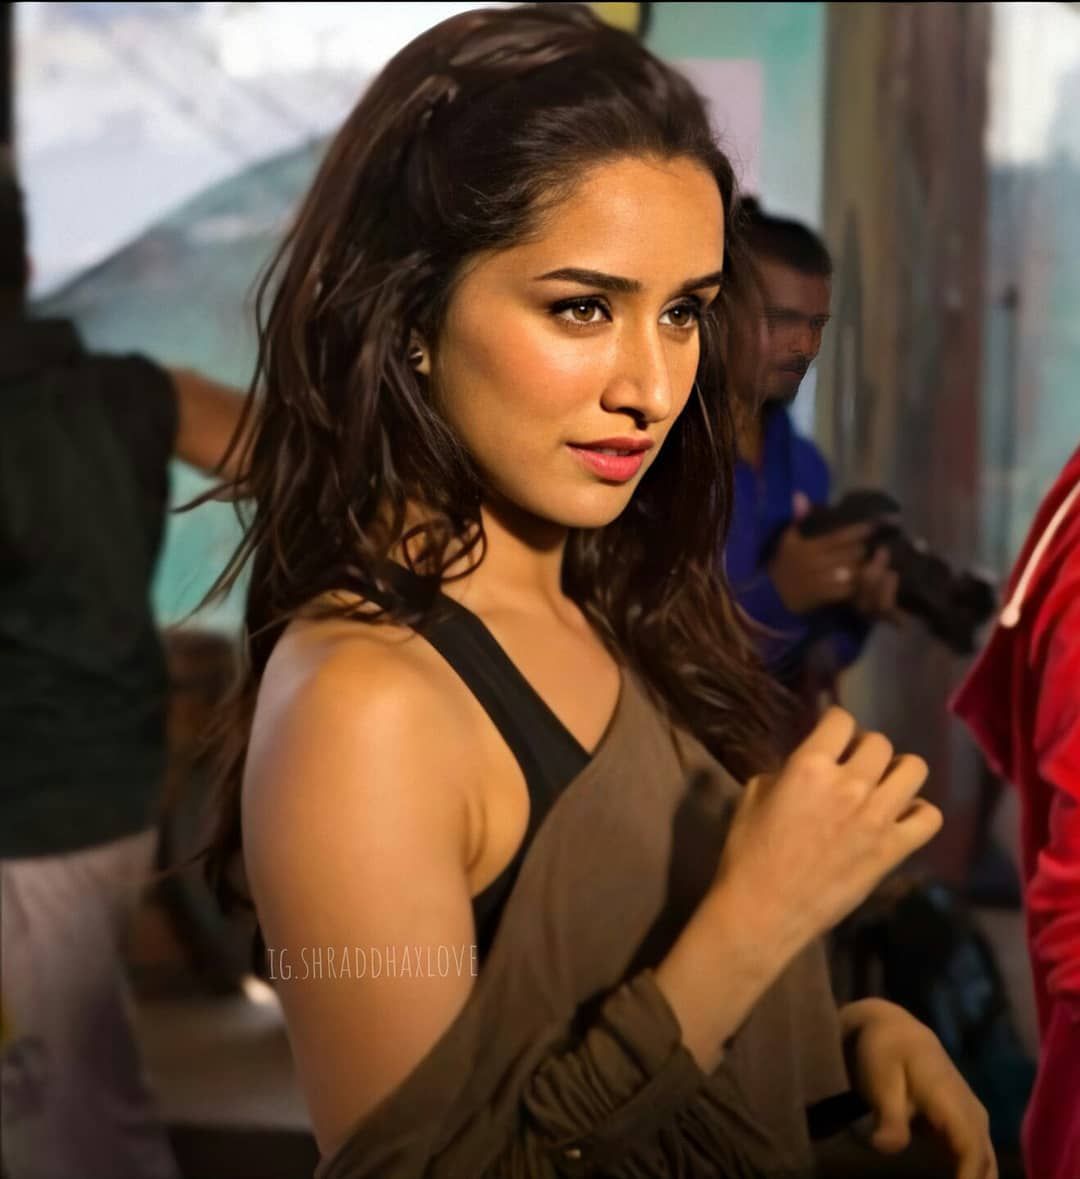 Fell in love with her dance in abcd2
14 YEARS OF SHRADDHA KAPOOR